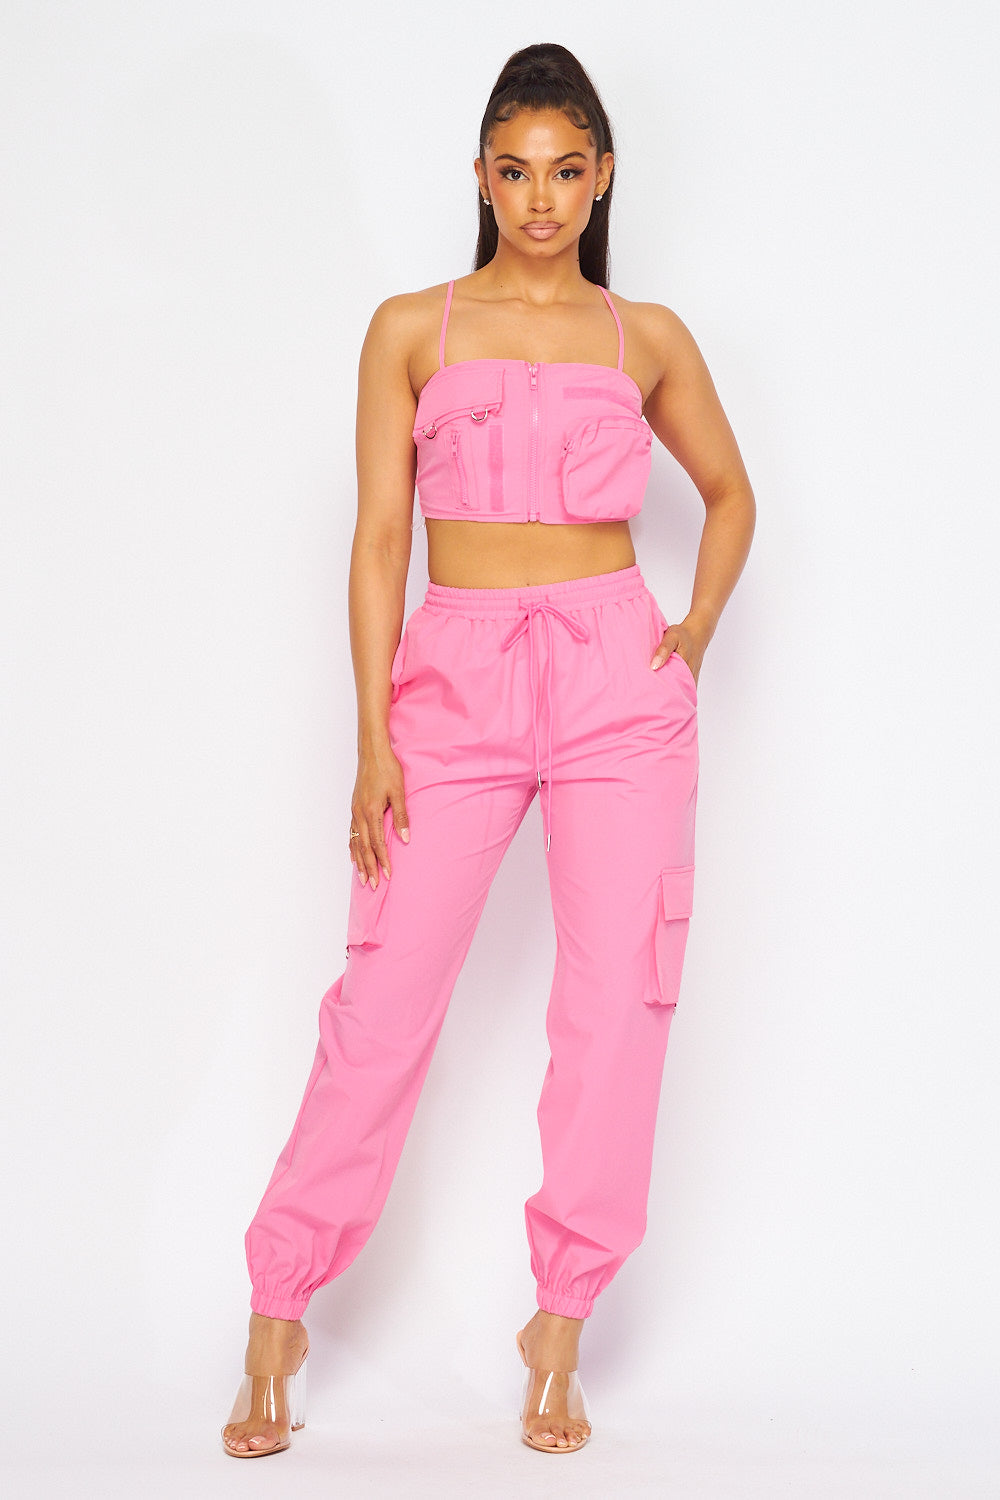 Make Me Famous Nylon Two Piece Top and Jogger Set